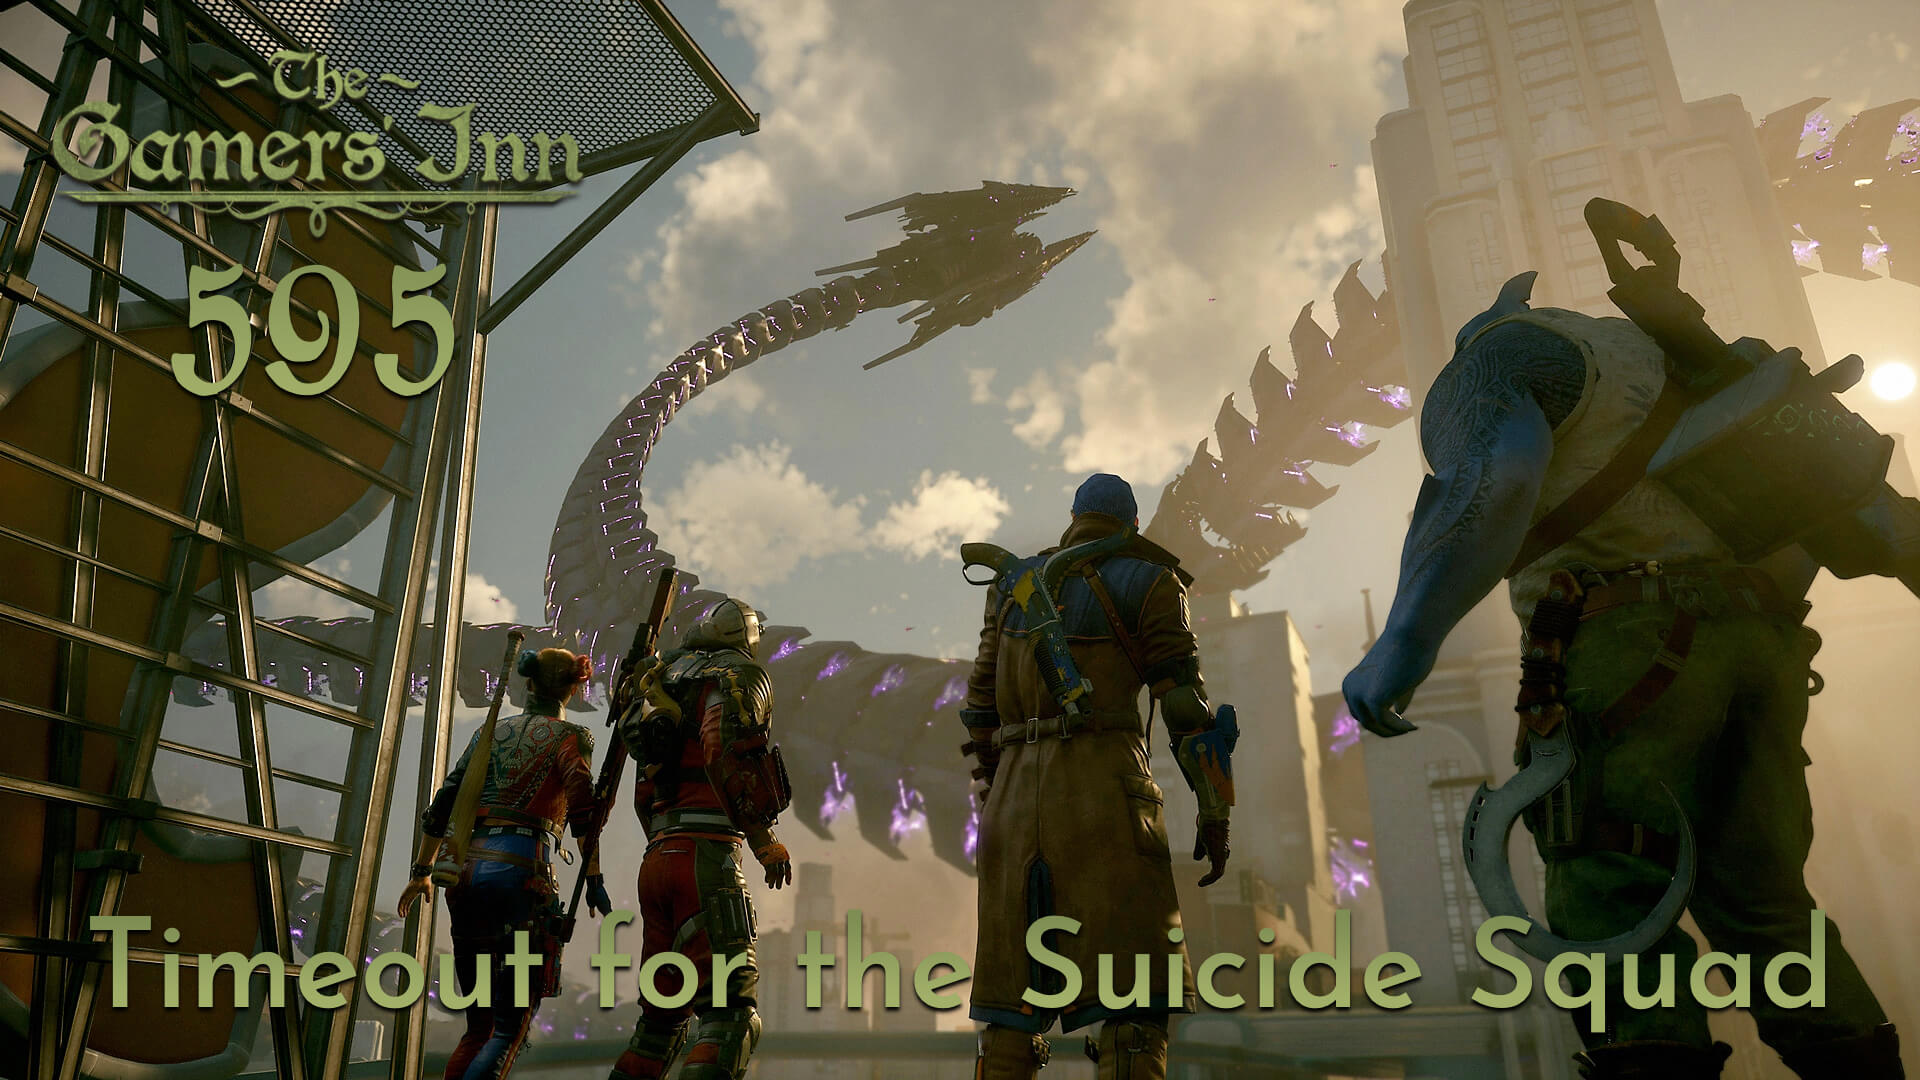 TGI 595 - Timeout for the Suicide Squad